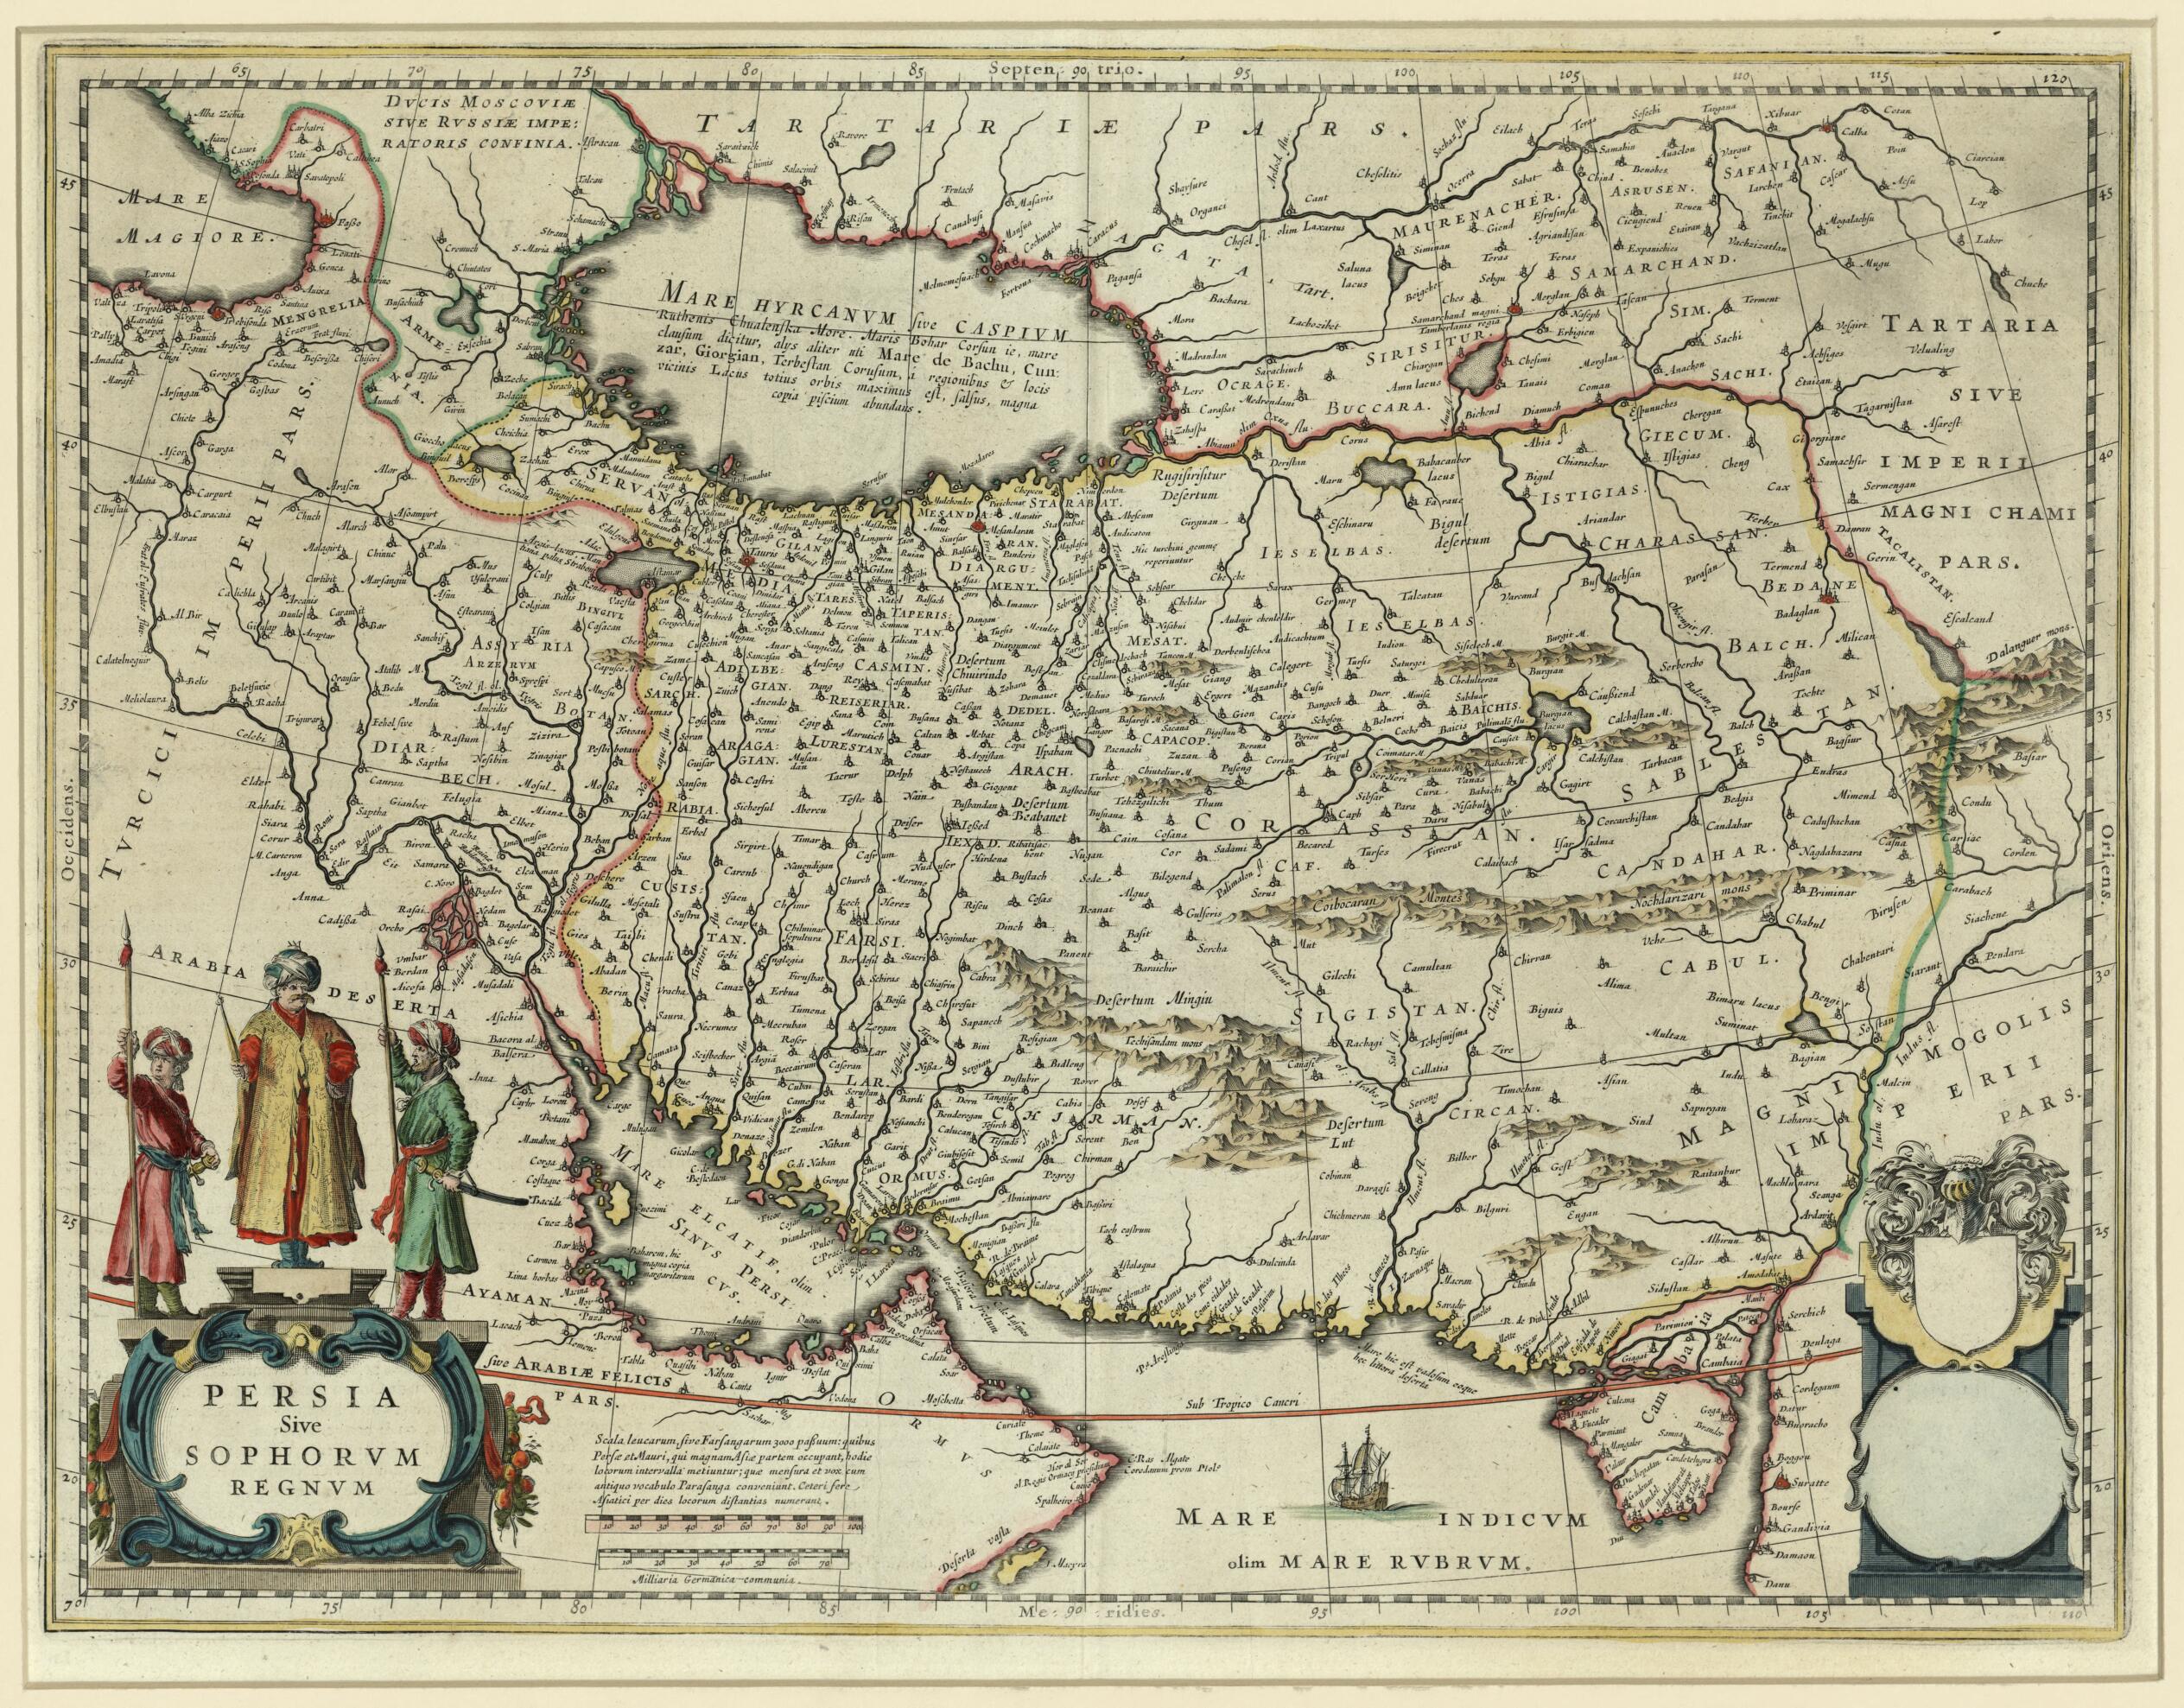 This old map of Persia, Or the Safavid Kingdom. (Persia Sive Sophorum Regnum) from 1635 was created by Willem Janszoon Blaeu in 1635